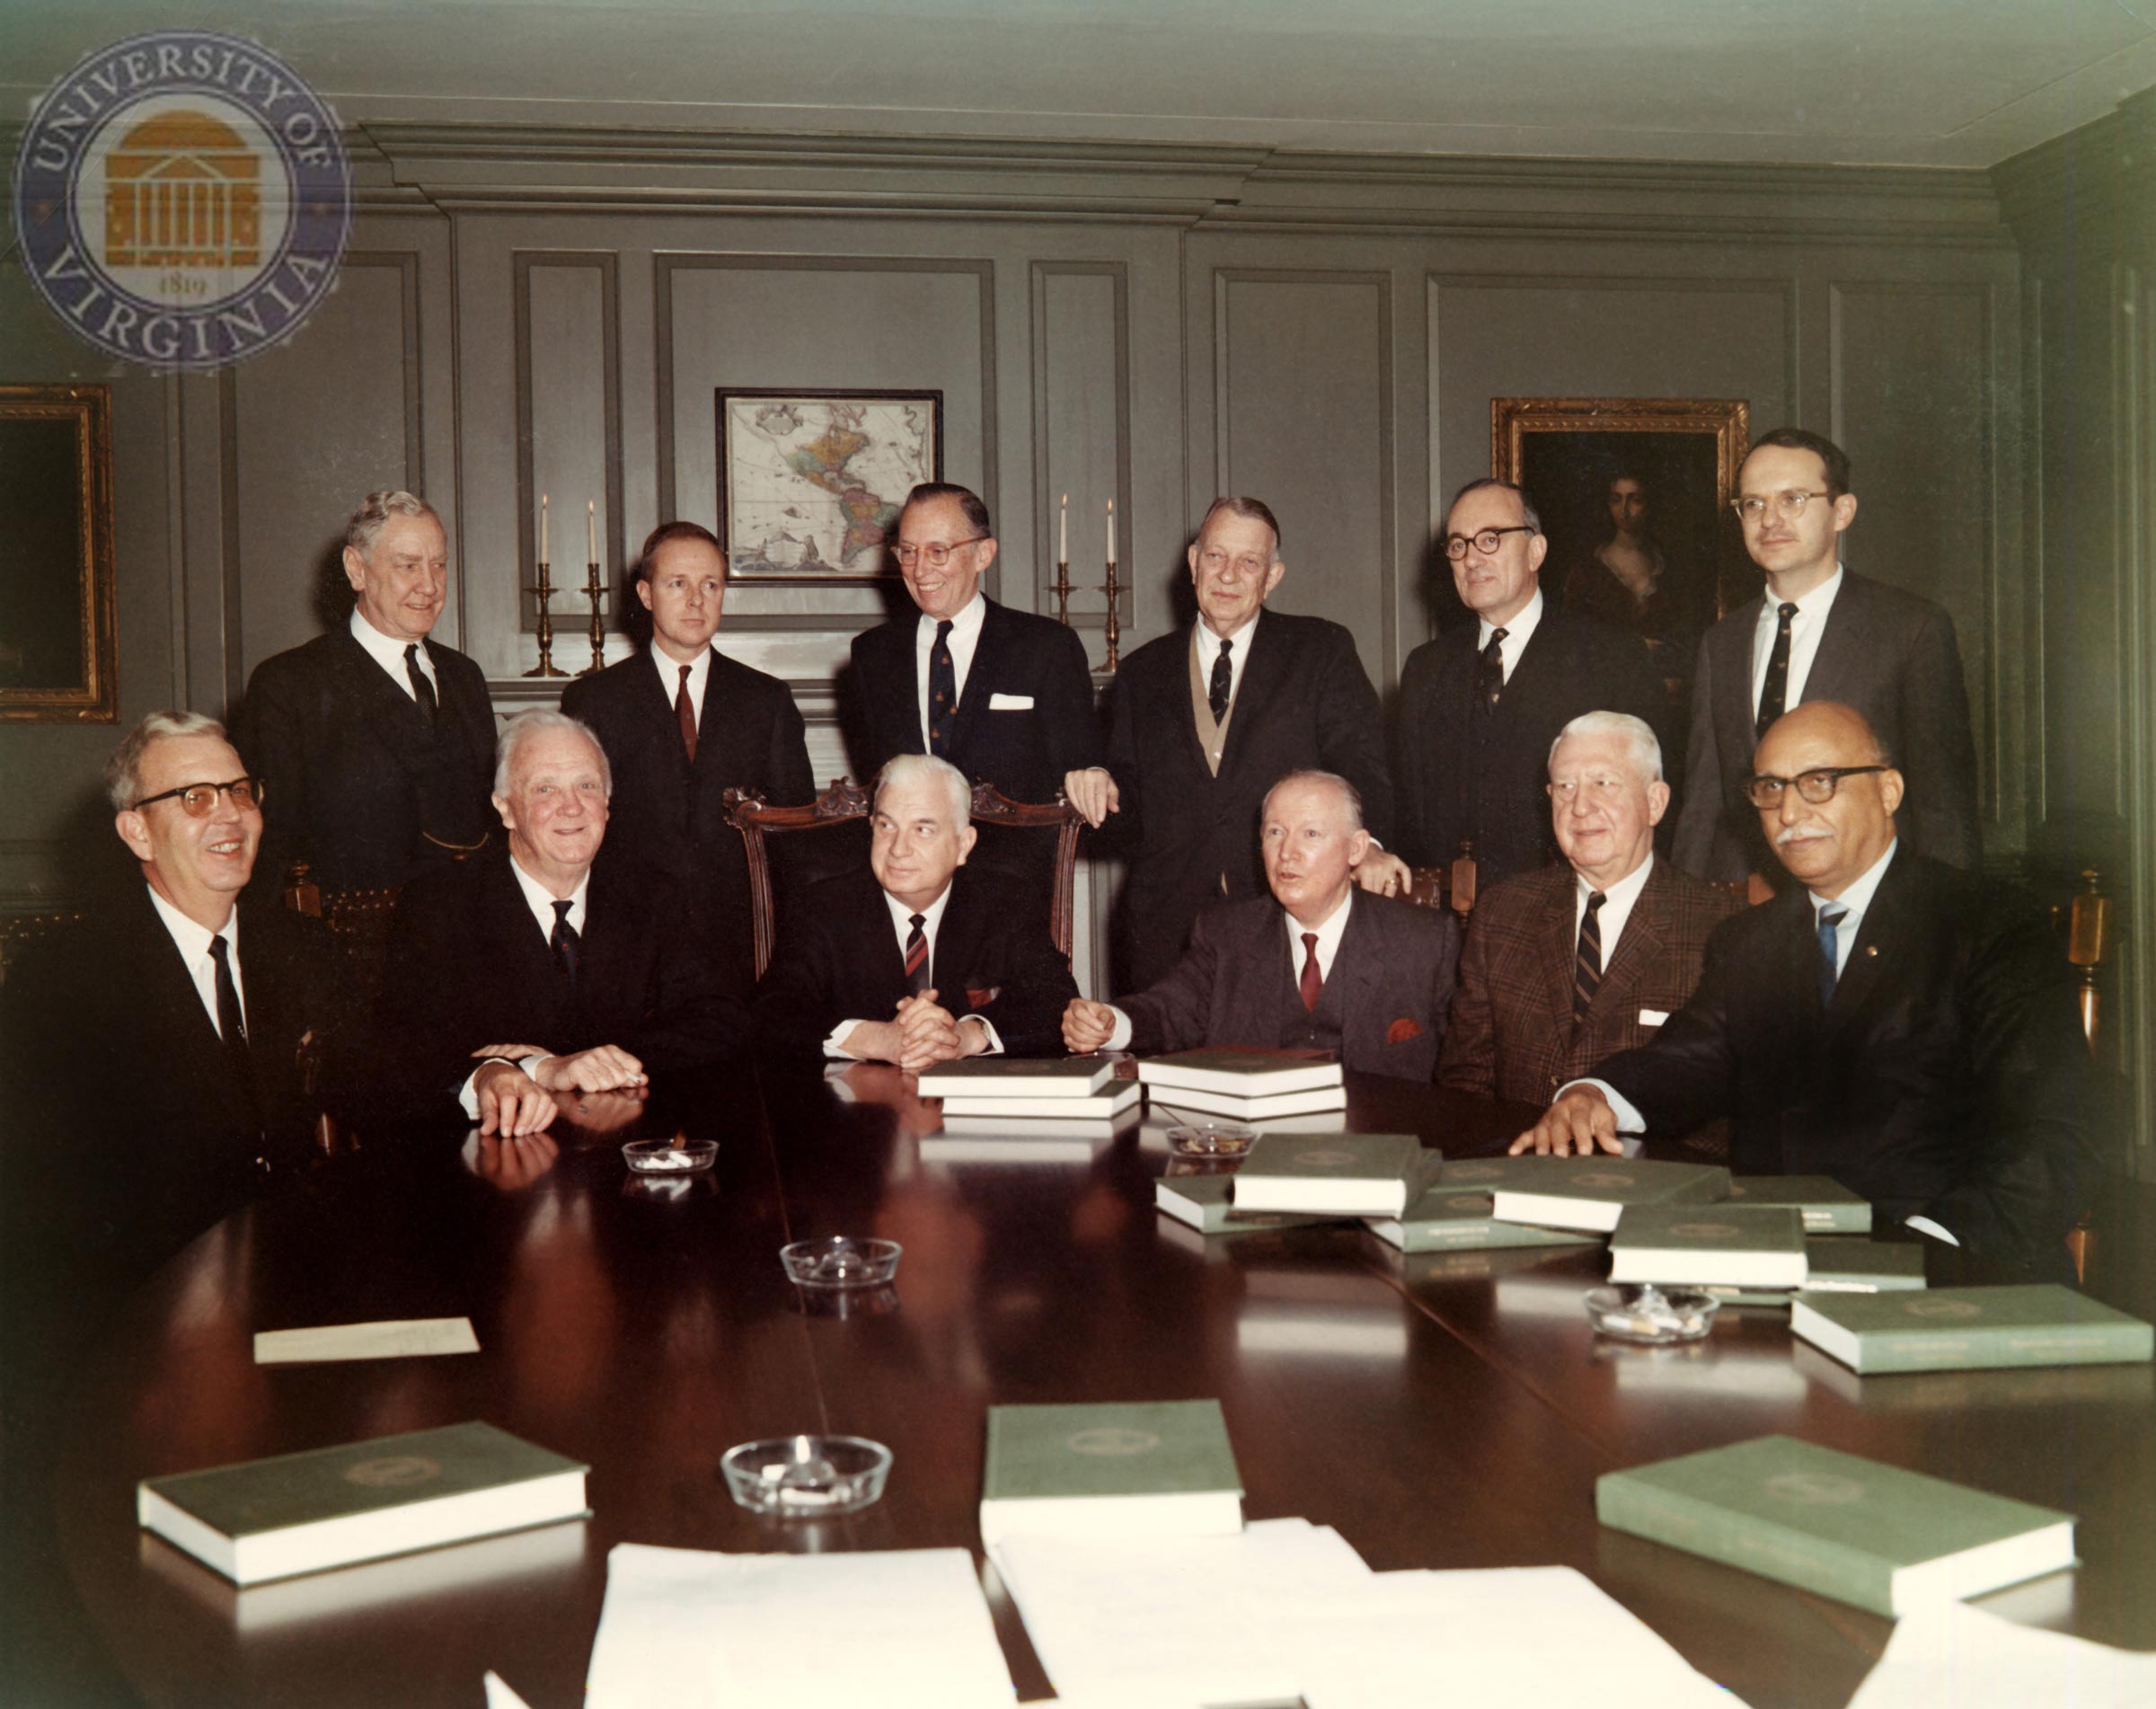 Howard (far right, standing) served as executive director of the Virginia Commission on Constitutional Revision with (seated, from left) Alexander M. Harman Jr., Colgate W. Darden, Albertis S. Harrison, Davis Y. Paschall, Ted Dalton, Oliver W. Hill; and (standing, from left) J. Sloan Kuykendall, Albert V. Bryan Jr., Lewis F. Powell Jr., Hardy C. Dillard and George M. Cochran. 